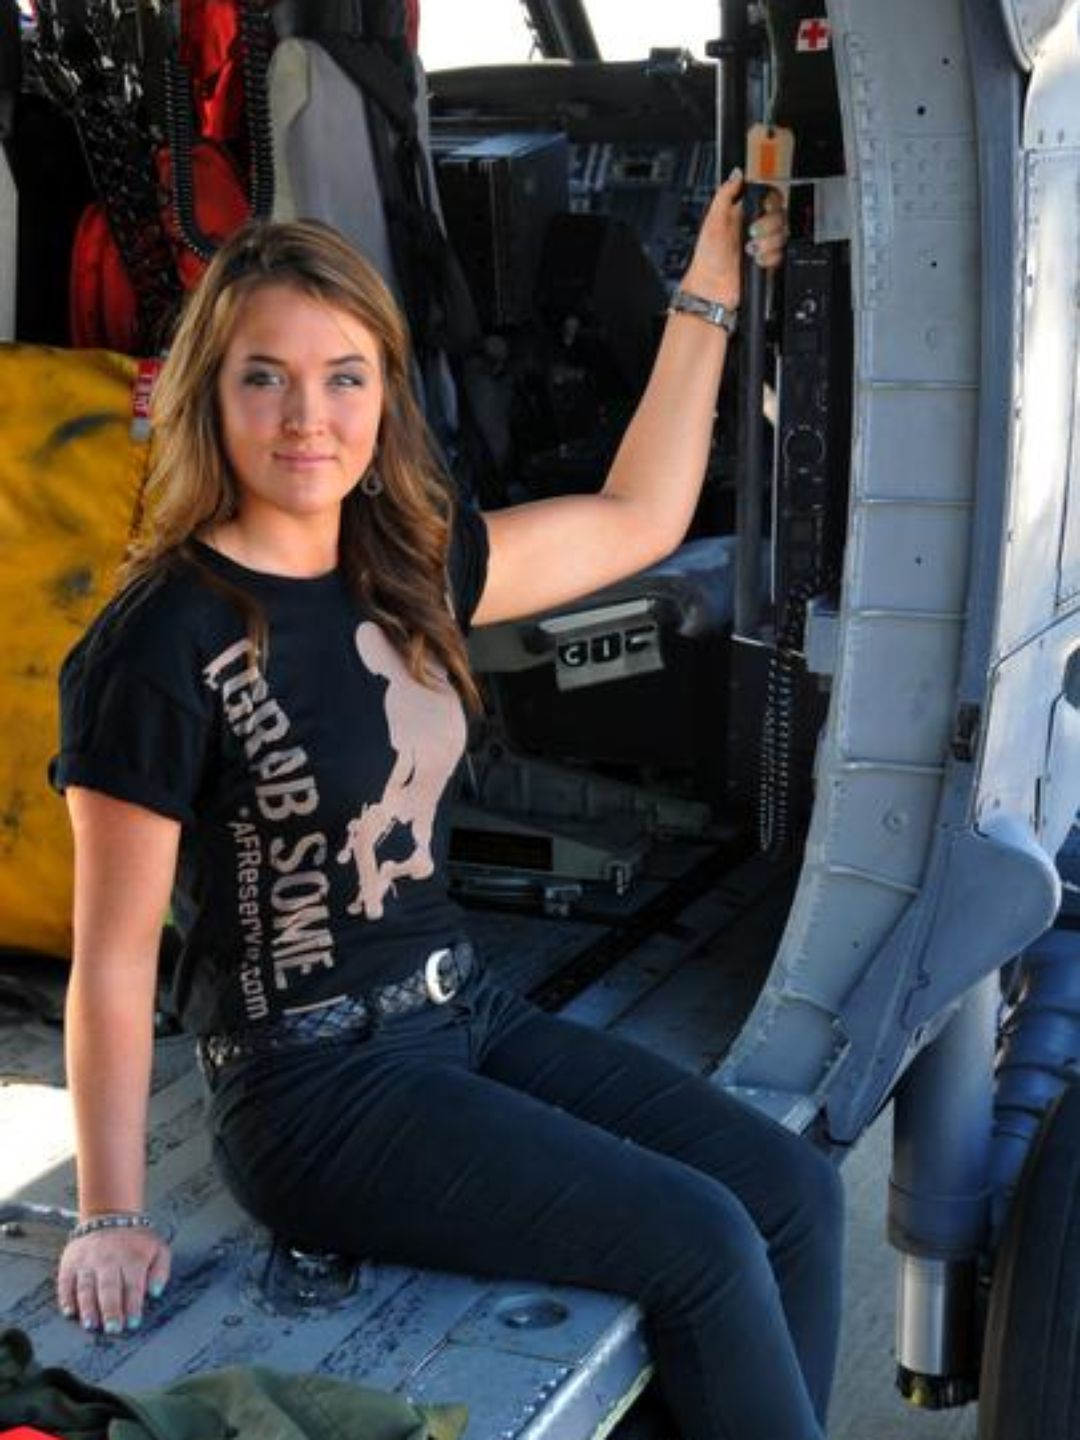 Florida Woman Set to Be USAF Reserve First